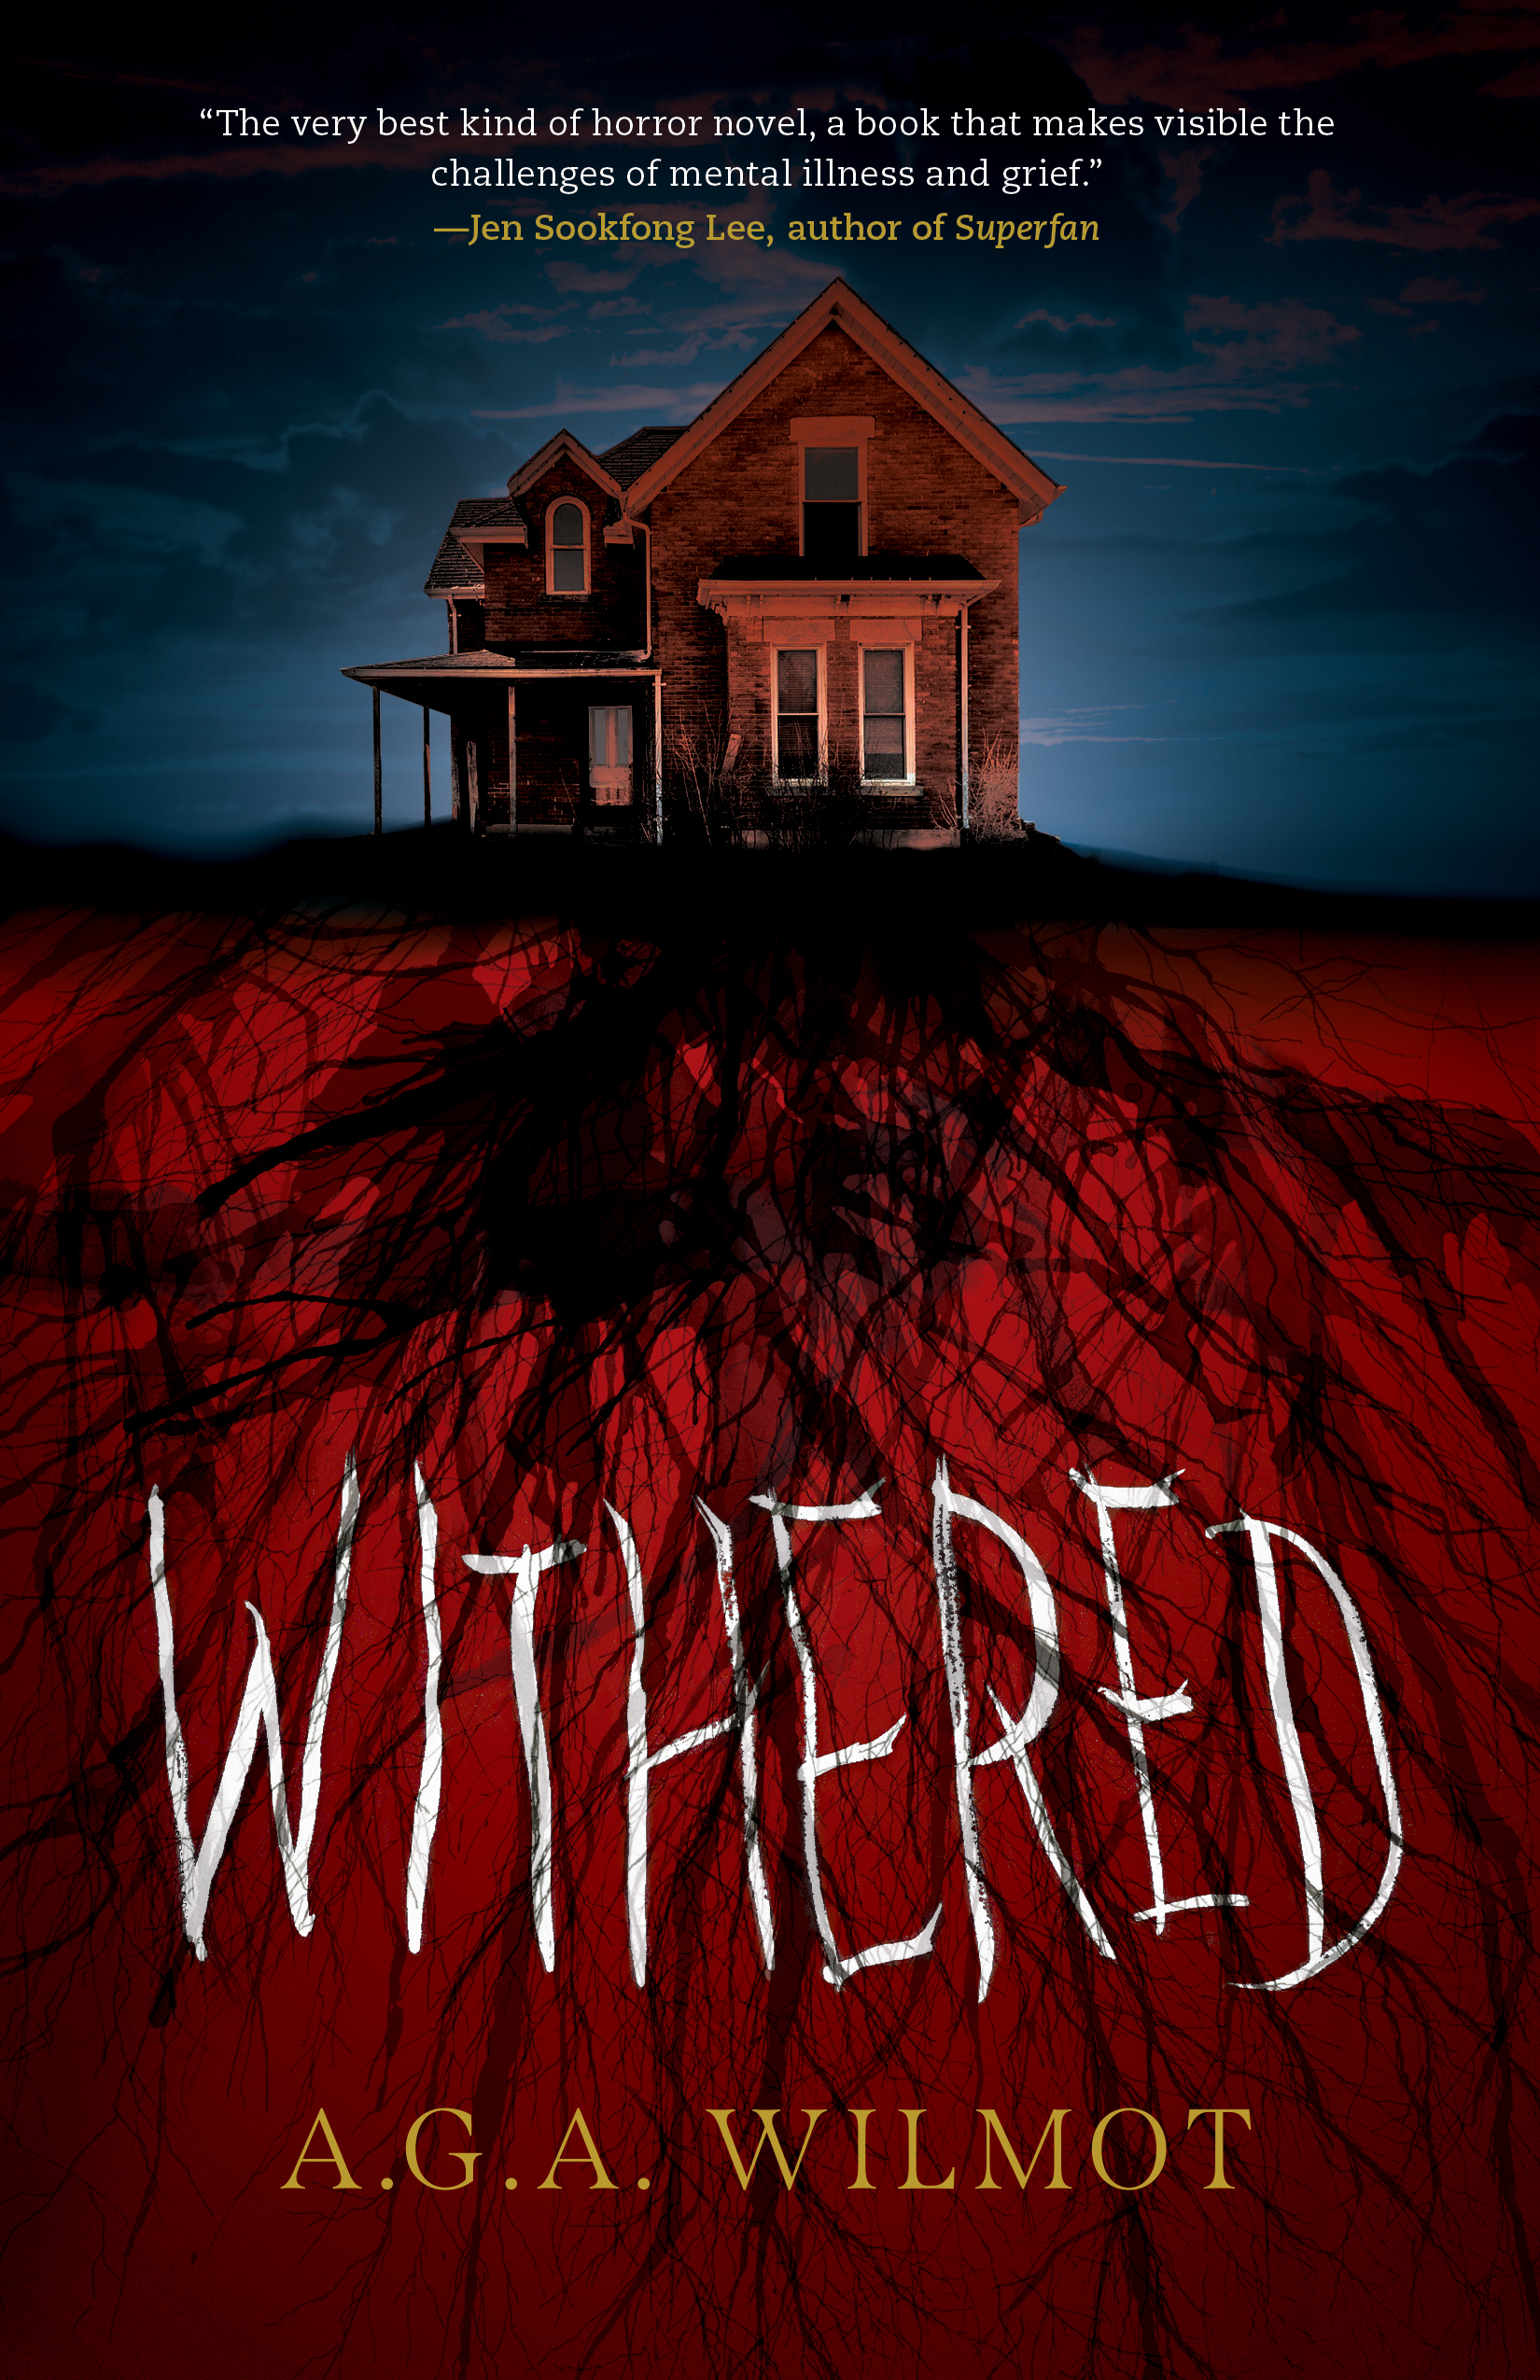 The cover of Withered by A.G.A. Wilmot.